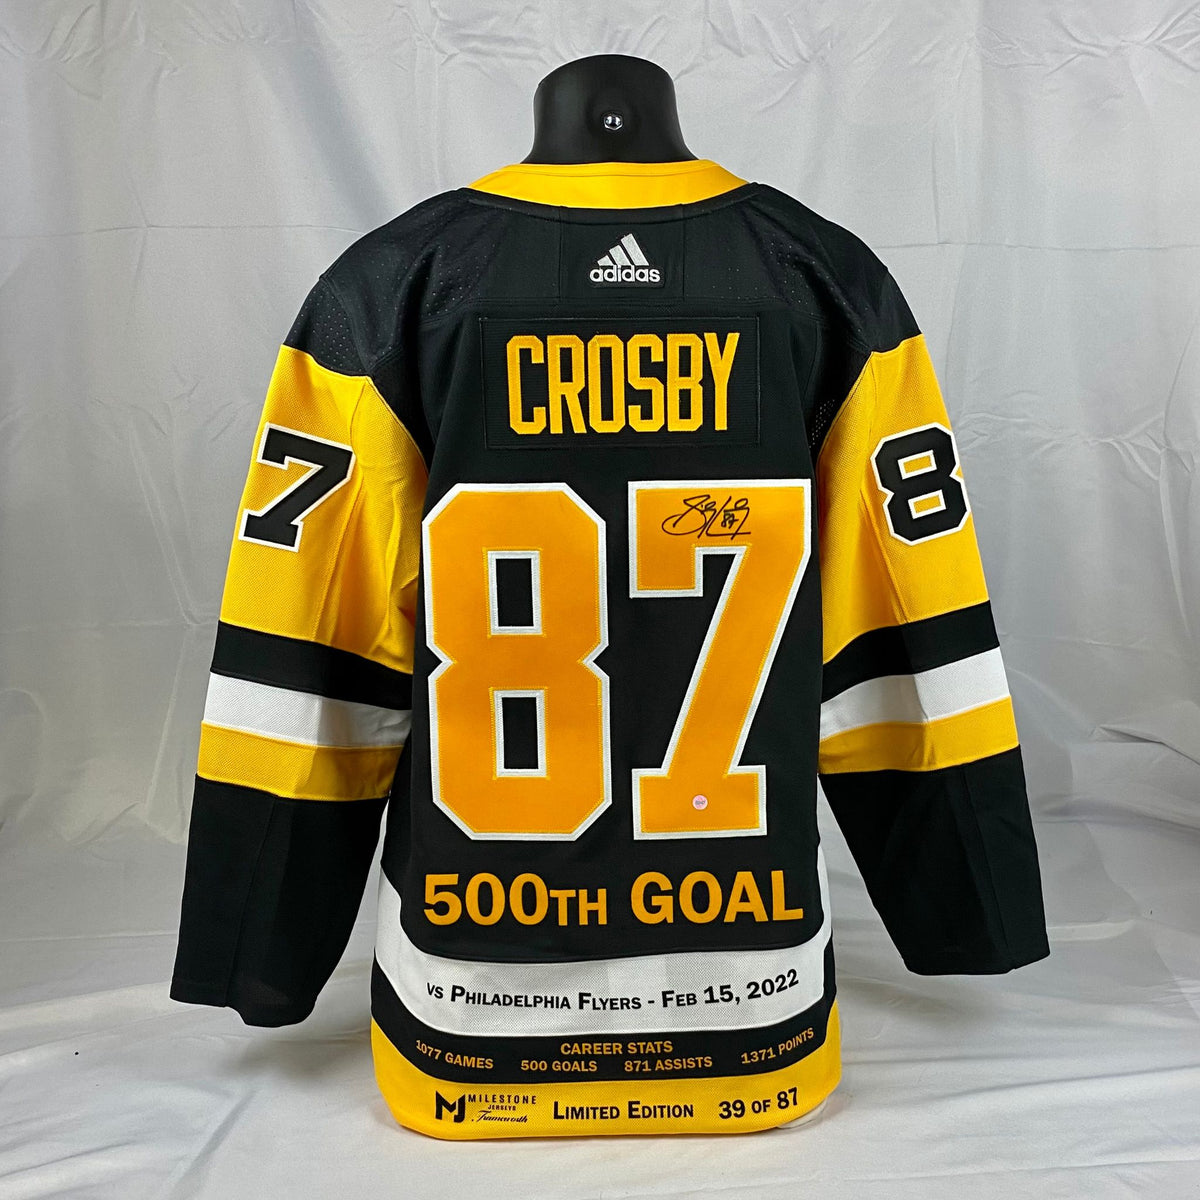 Sidney Crosby Signed Penguins Captain 2008 Winter Classic Jersey